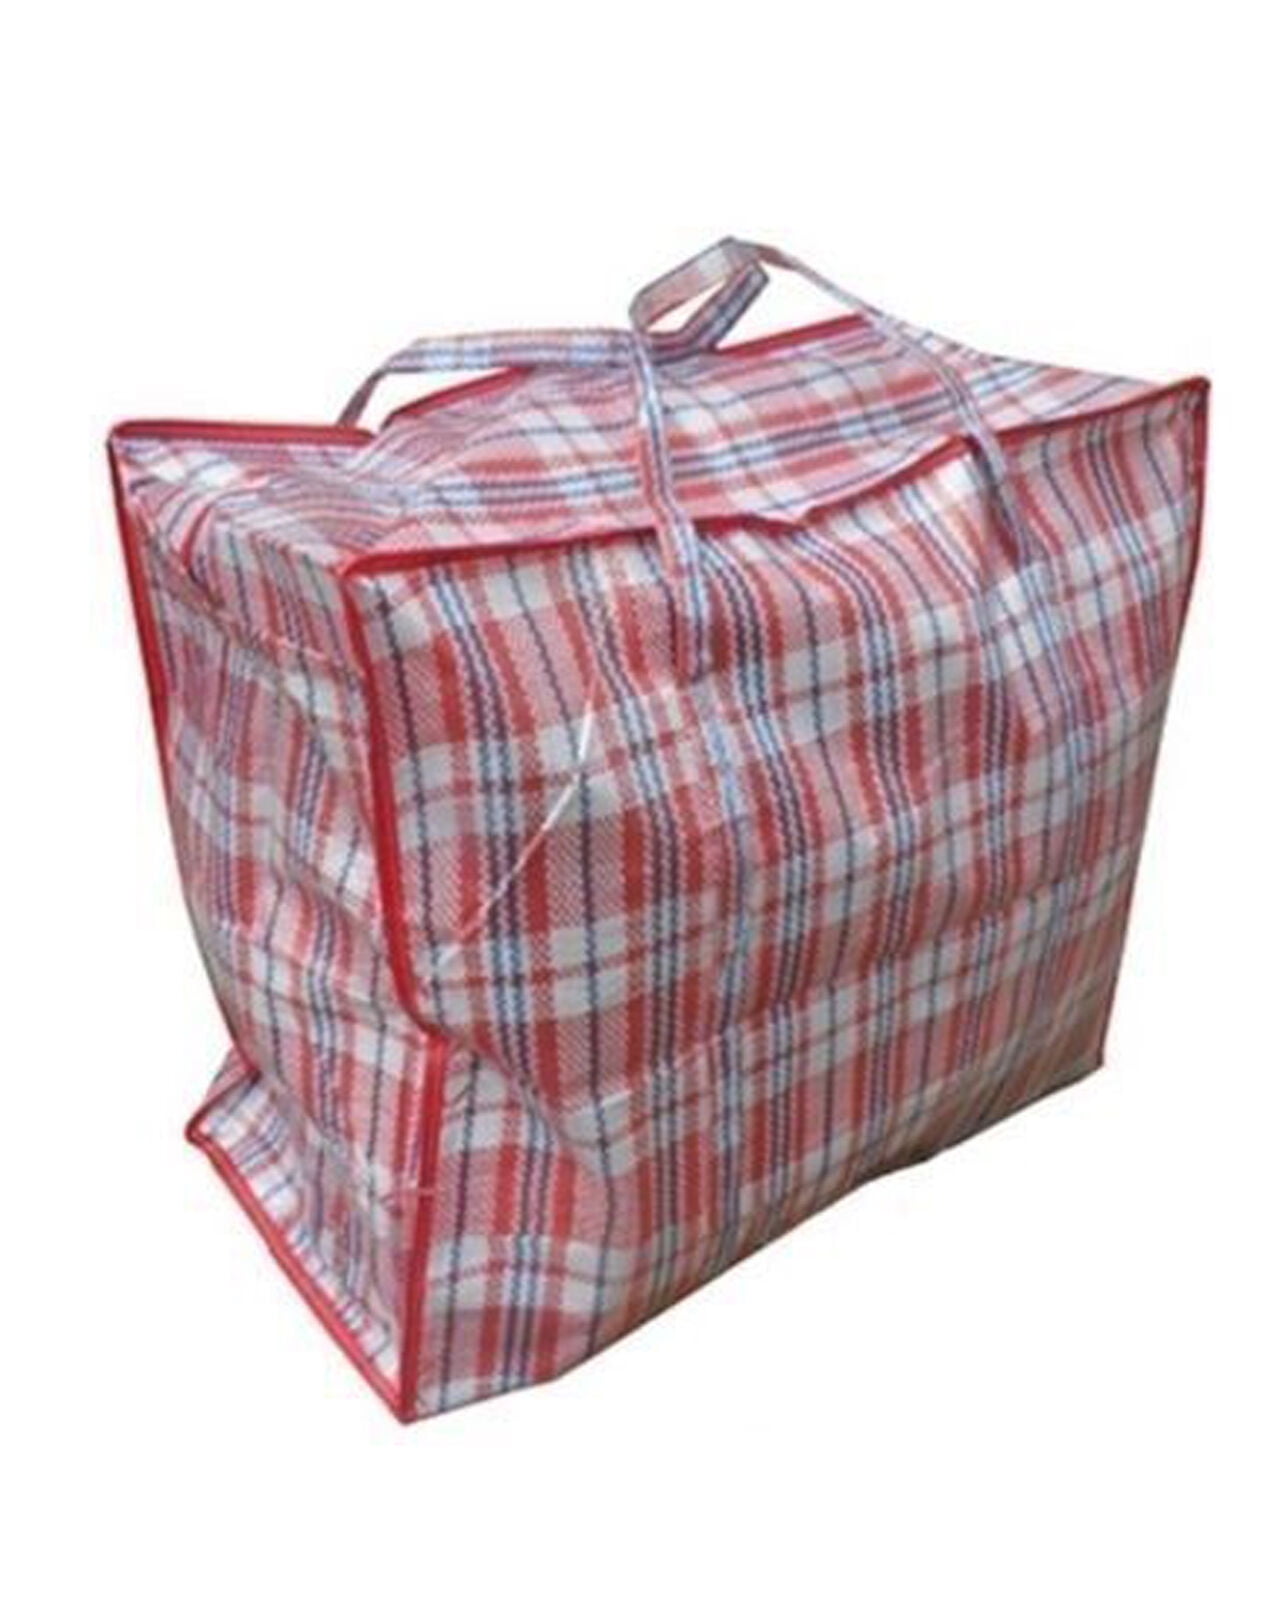 Details about   Reusable Laundry Storage Bag Shopping Zip Bags Durable Jumbo Large Laundry Bag 